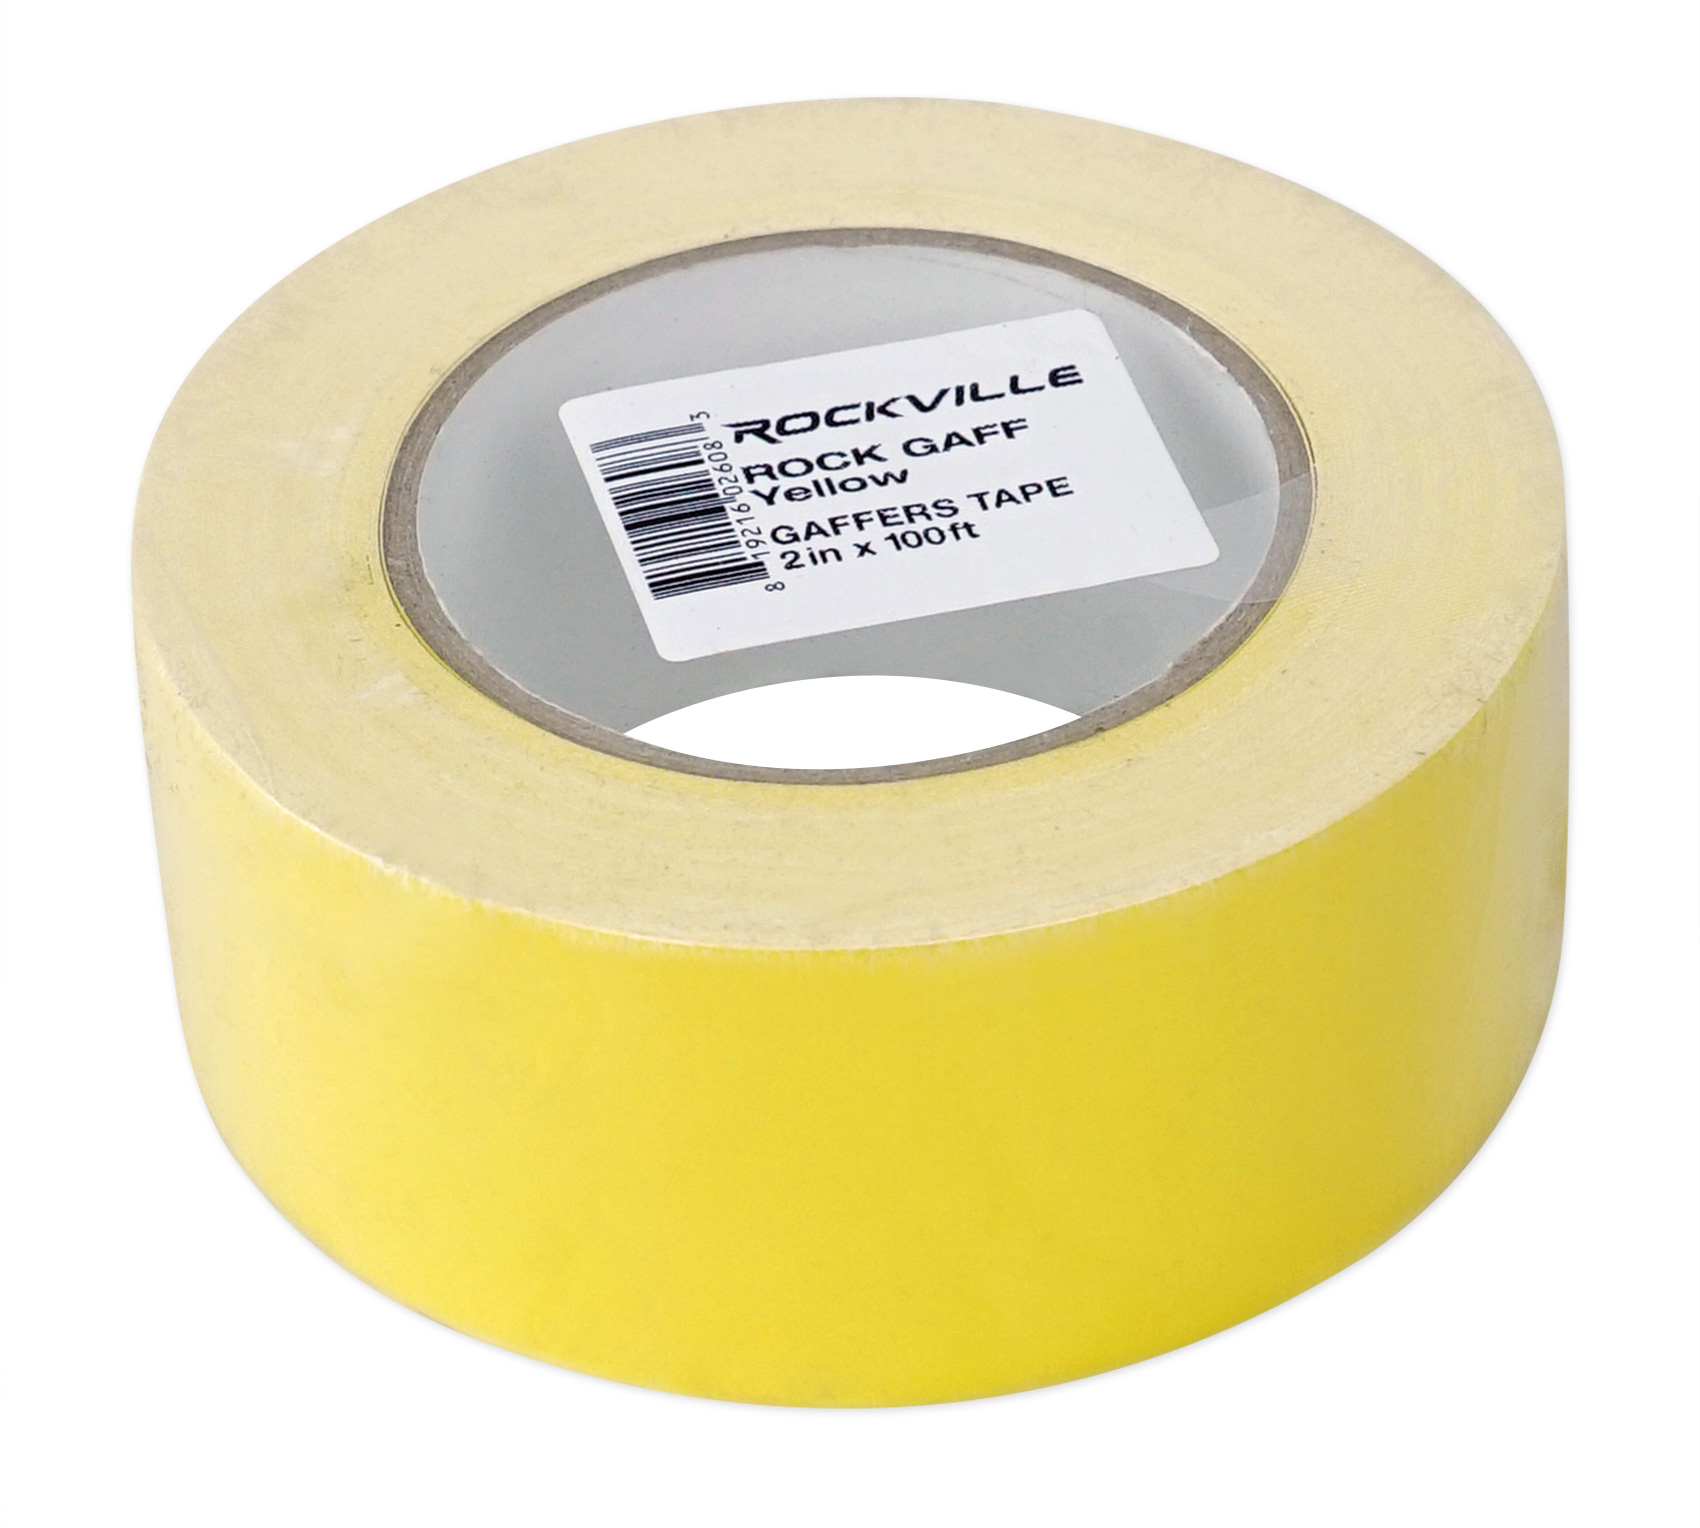 (6) Rolls Rockville Pro Audio/Stage Wire ROCK GAFF Yellow Gaffers Tape 2"x100 Ft - image 4 of 6